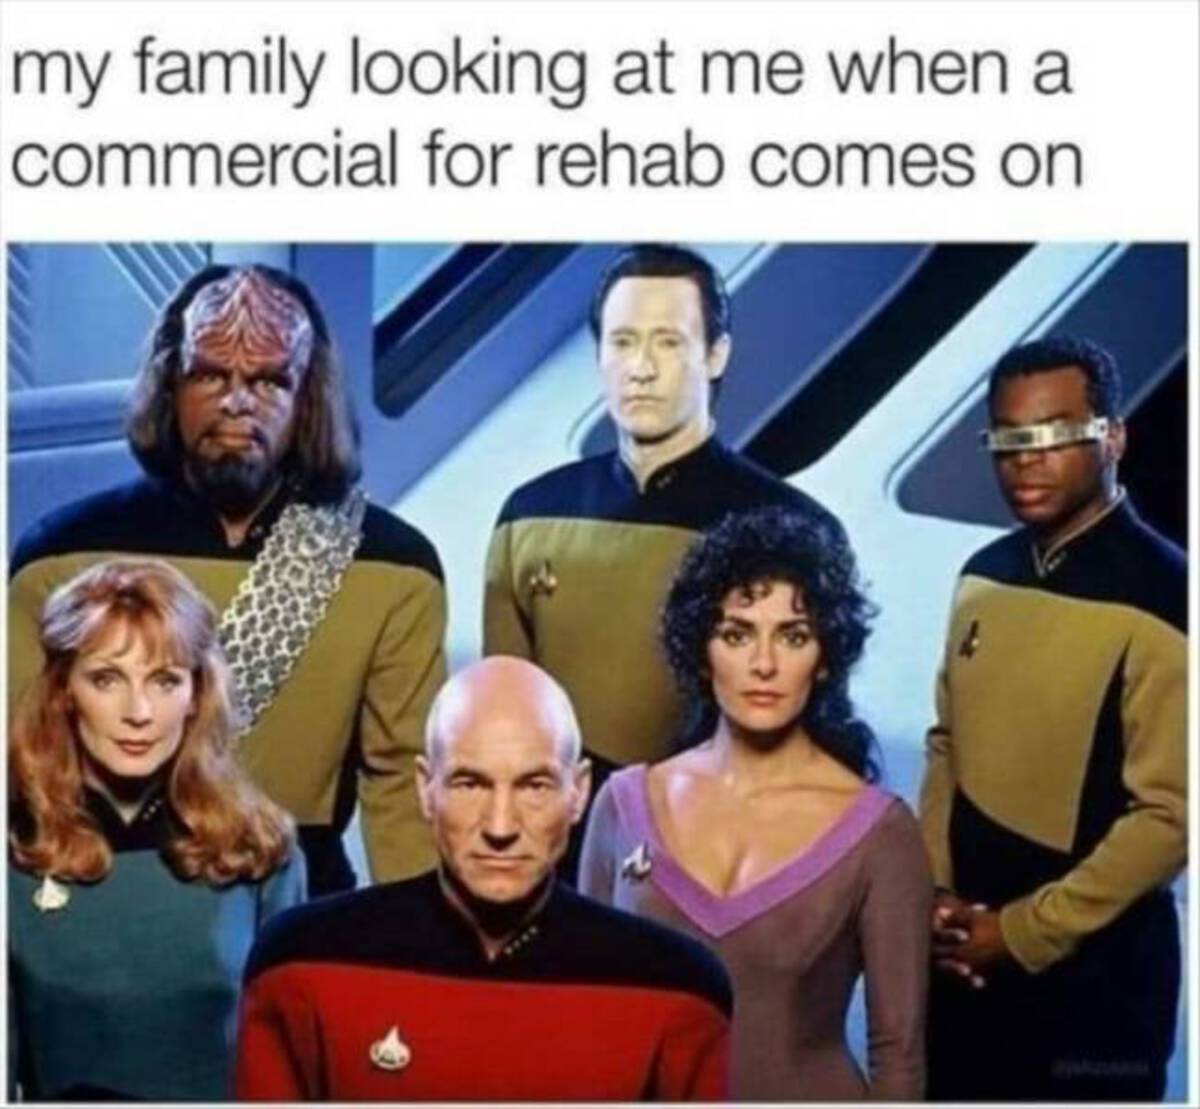 star trek new generation - my family looking at me when a commercial for rehab comes on